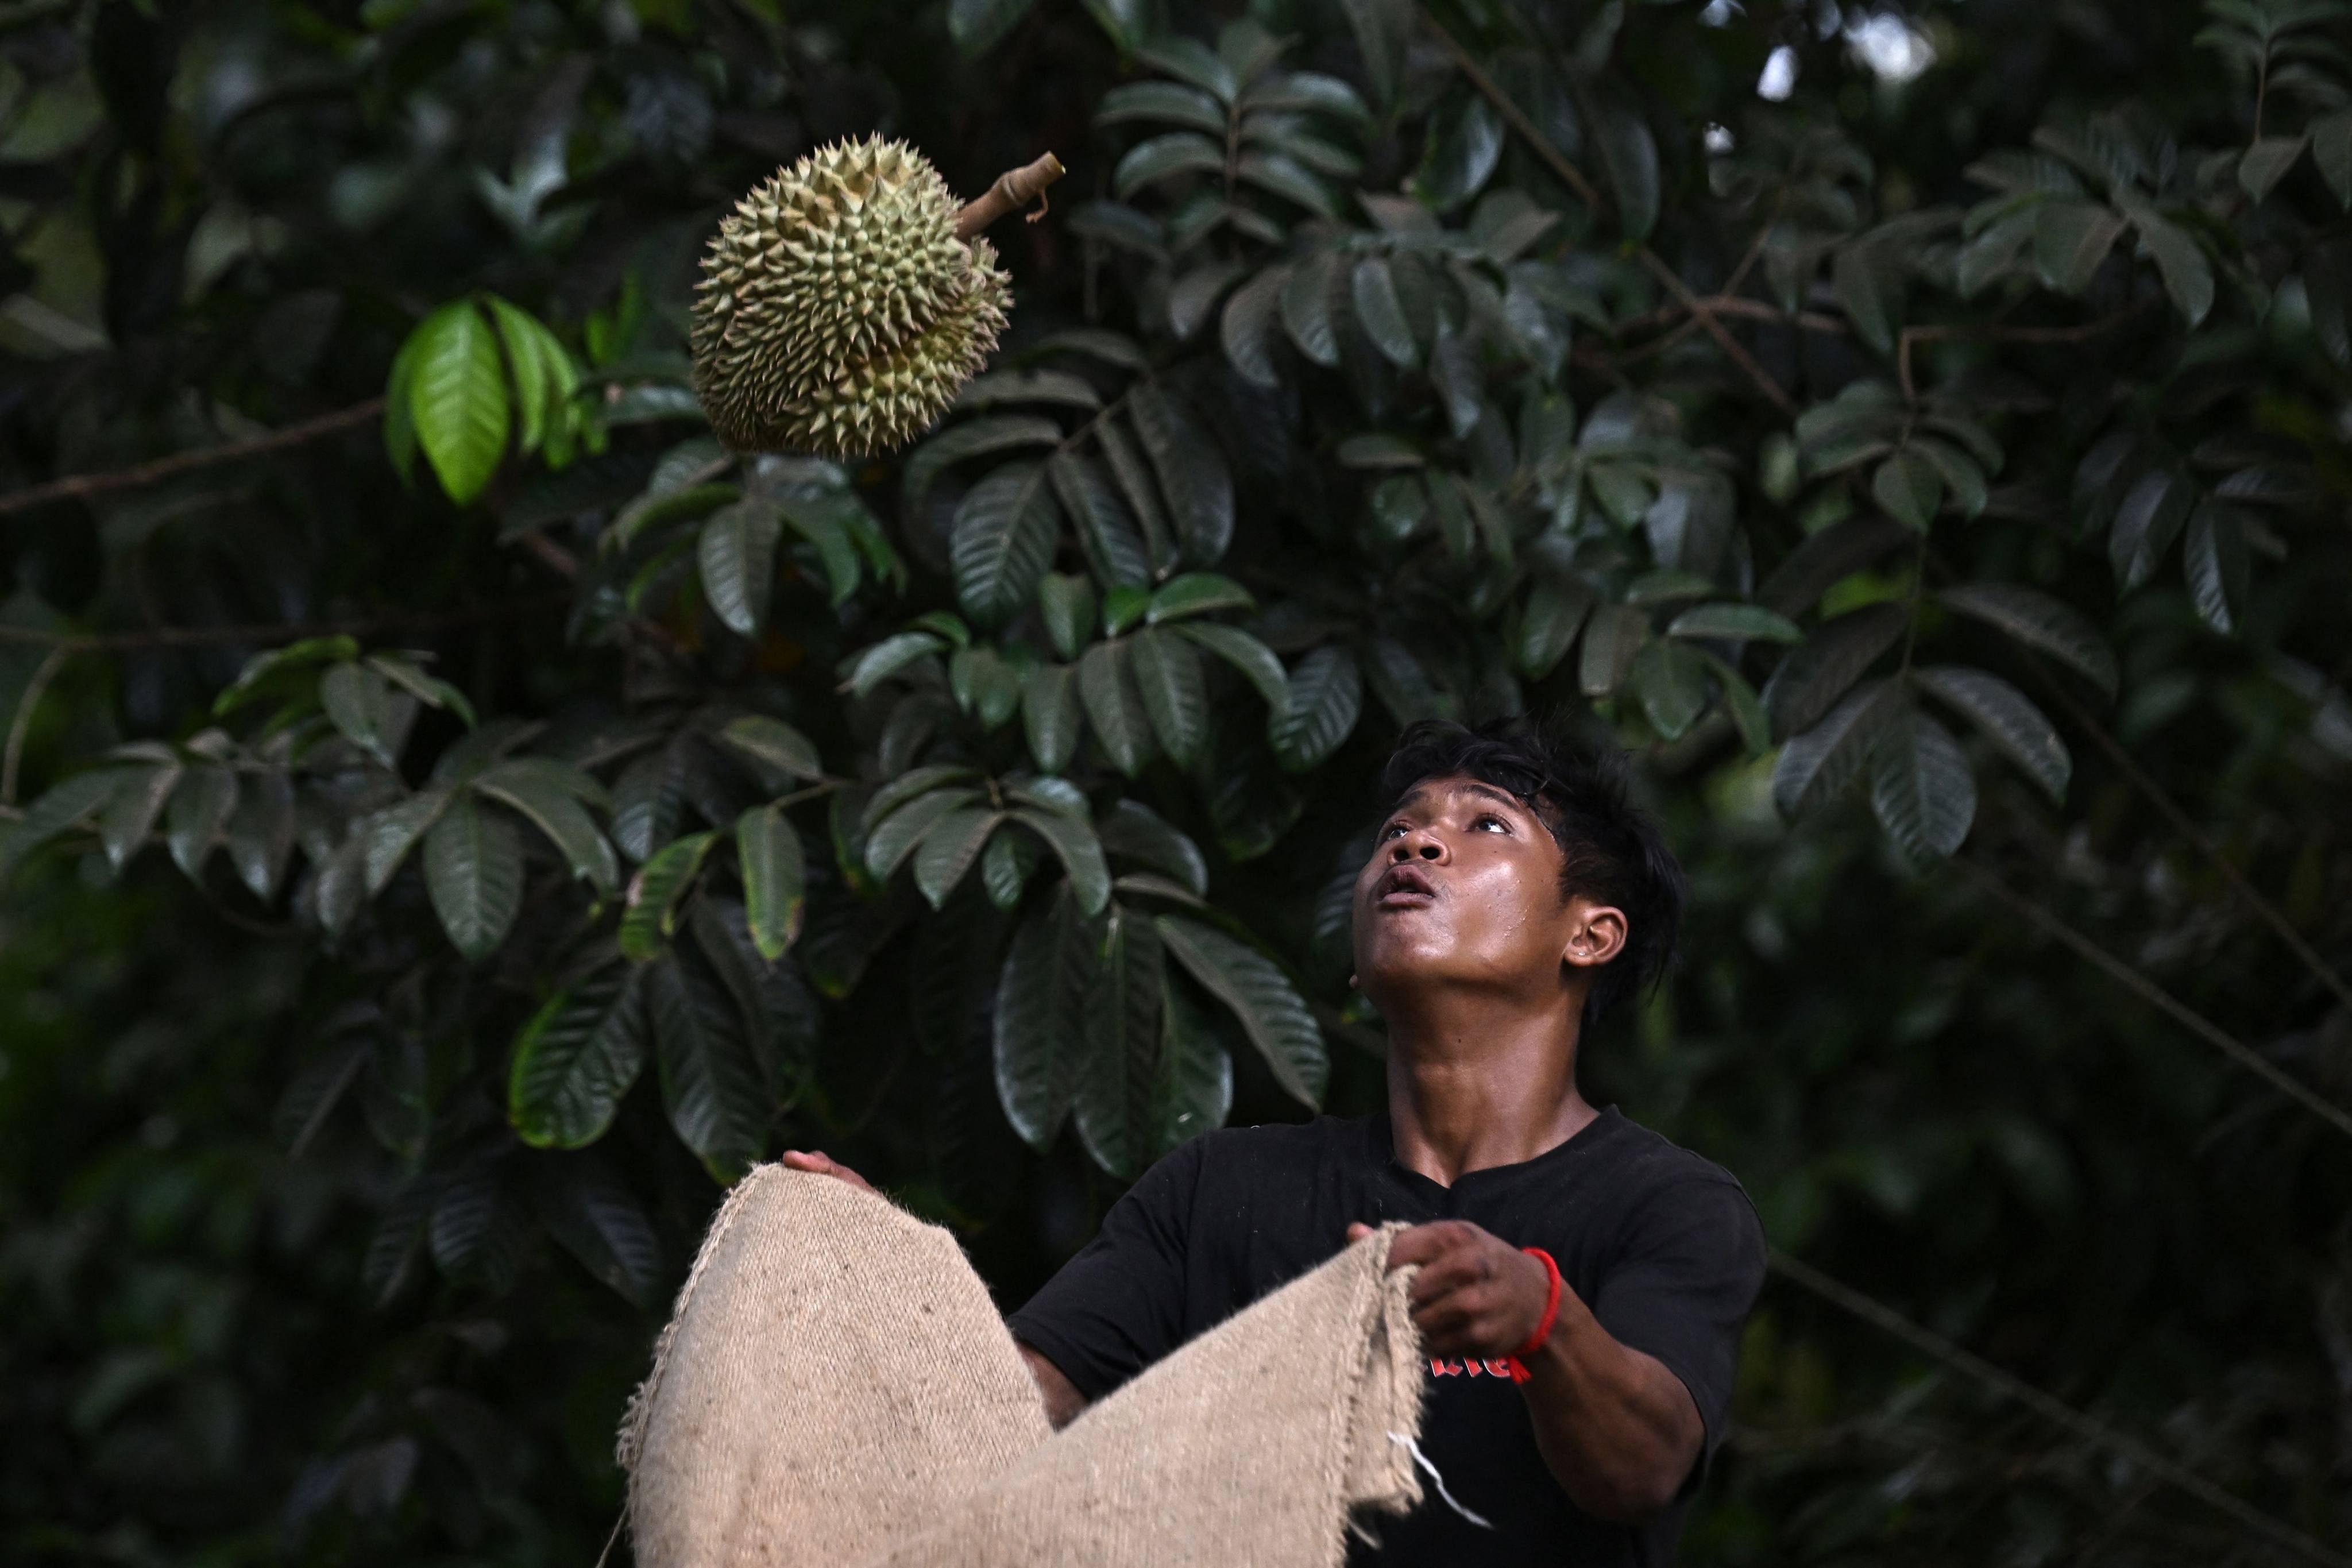 China’s durian market, the largest in the world, is seeing price shifts as its import picture changes. Photo: AFP